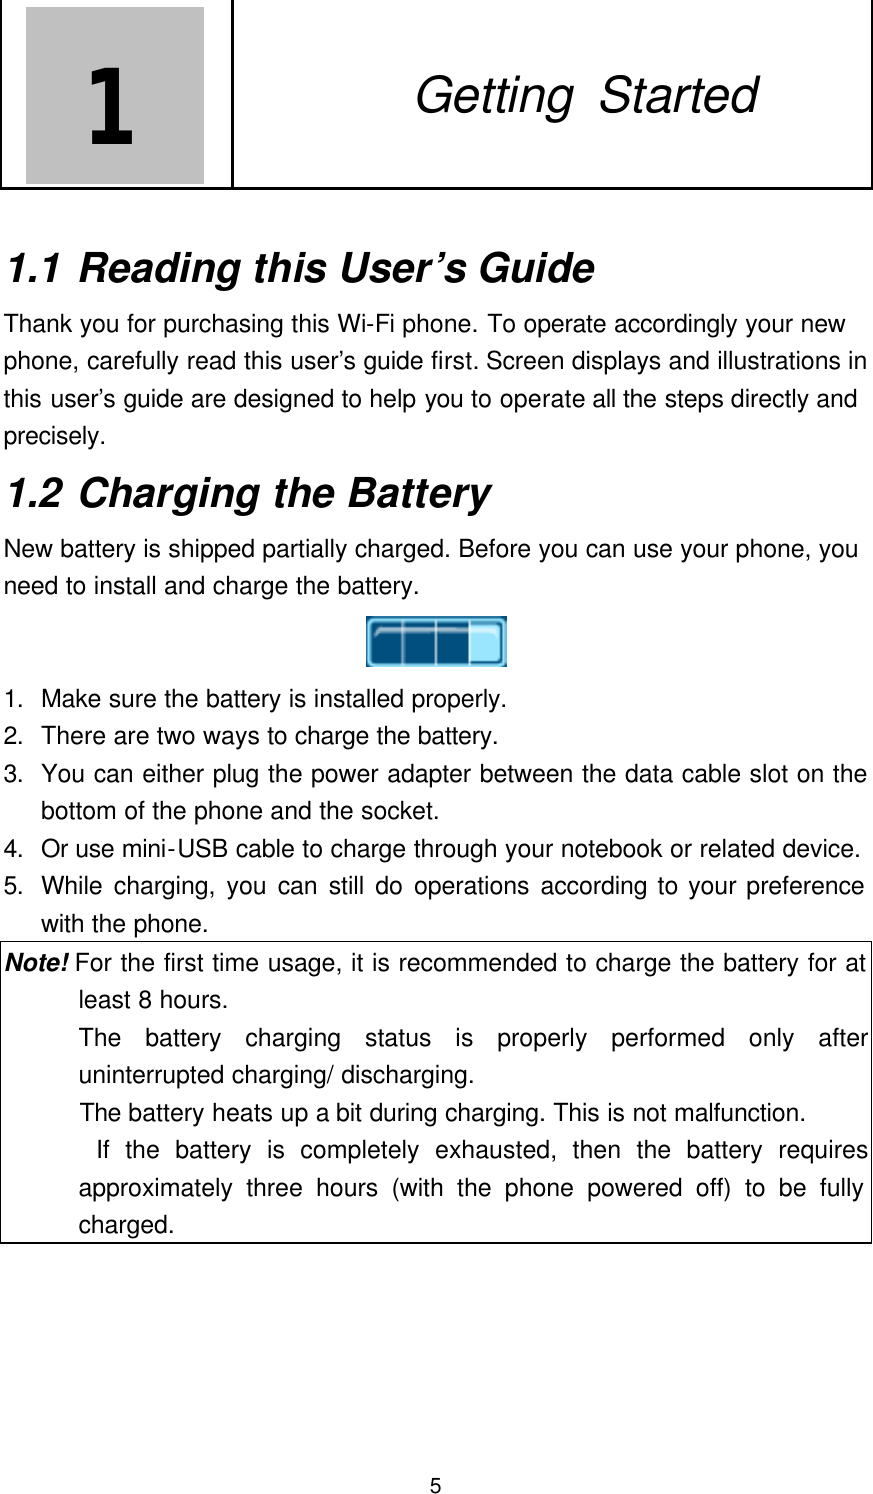  5 1   1. Getting Started  1.1 Reading this User’s Guide Thank you for purchasing this Wi-Fi phone. To operate accordingly your new phone, carefully read this user’s guide first. Screen displays and illustrations in this user’s guide are designed to help you to operate all the steps directly and precisely.    1.2 Charging the Battery New battery is shipped partially charged. Before you can use your phone, you need to install and charge the battery.  1. Make sure the battery is installed properly. 2. There are two ways to charge the battery. 3. You can either plug the power adapter between the data cable slot on the bottom of the phone and the socket. 4. Or use mini-USB cable to charge through your notebook or related device.   5. While charging, you can still do operations according to your preference with the phone. Note! For the first time usage, it is recommended to charge the battery for at least 8 hours. The battery charging status is properly performed only after uninterrupted charging/ discharging.    The battery heats up a bit during charging. This is not malfunction.       If the battery is completely exhausted, then the battery requires approximately three hours (with the phone powered off) to be fully charged.       